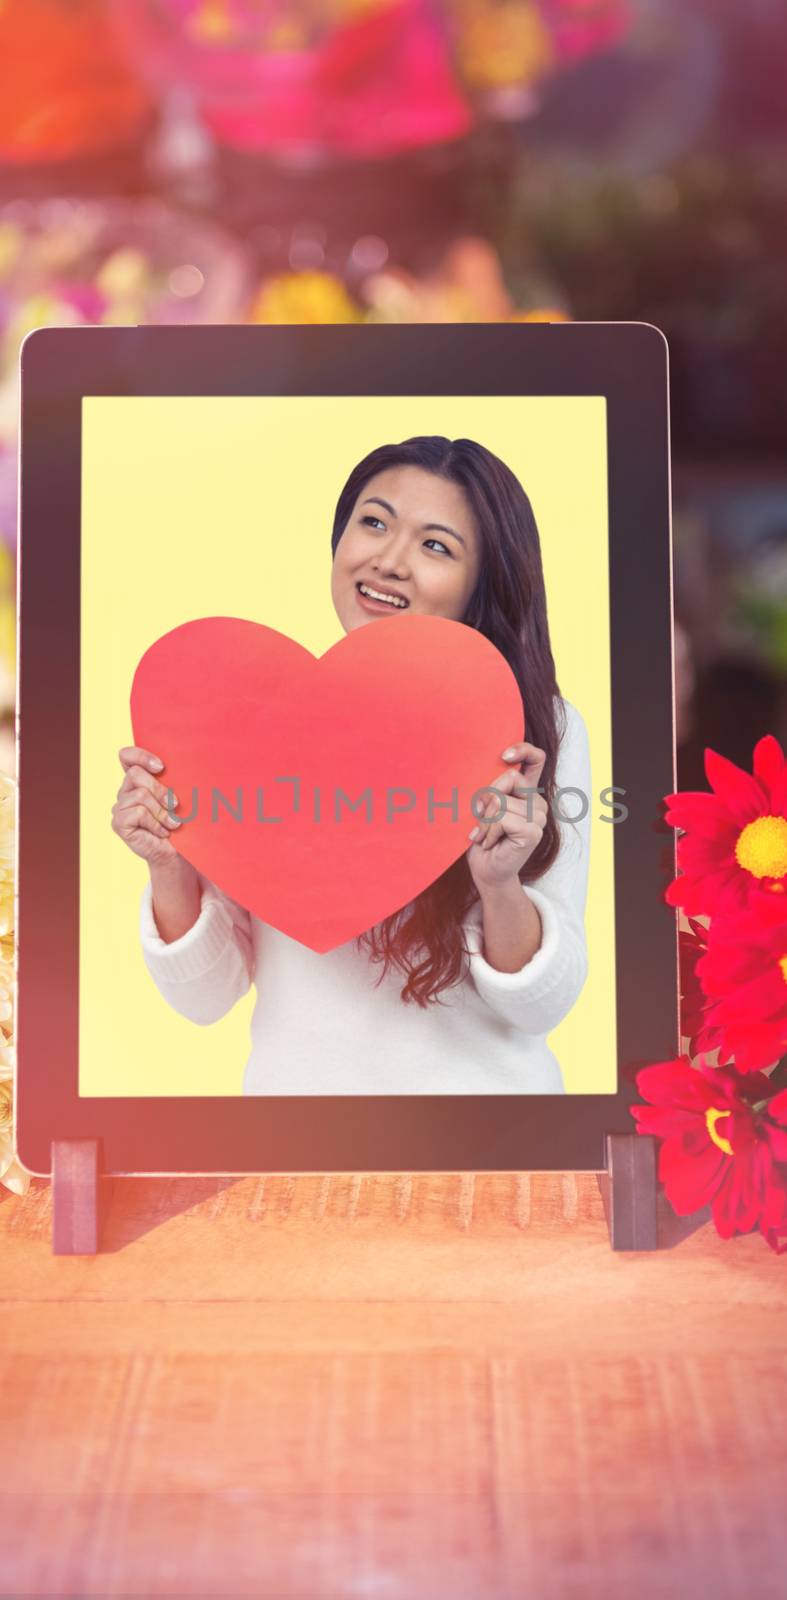 Smiling Asian woman holding paper heart against digital technology with flowers